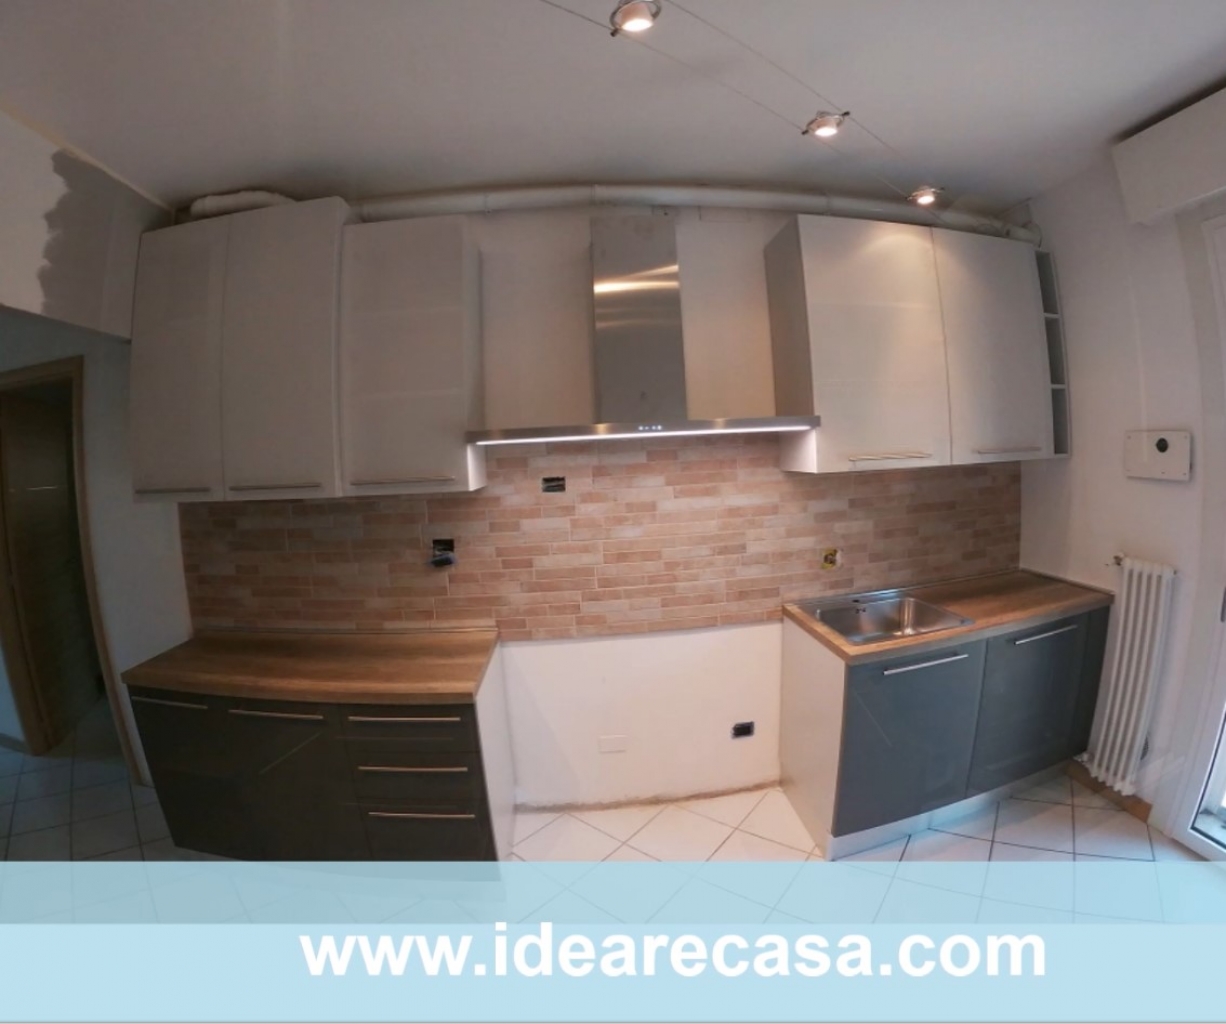 Kitchen with customized boiler cover